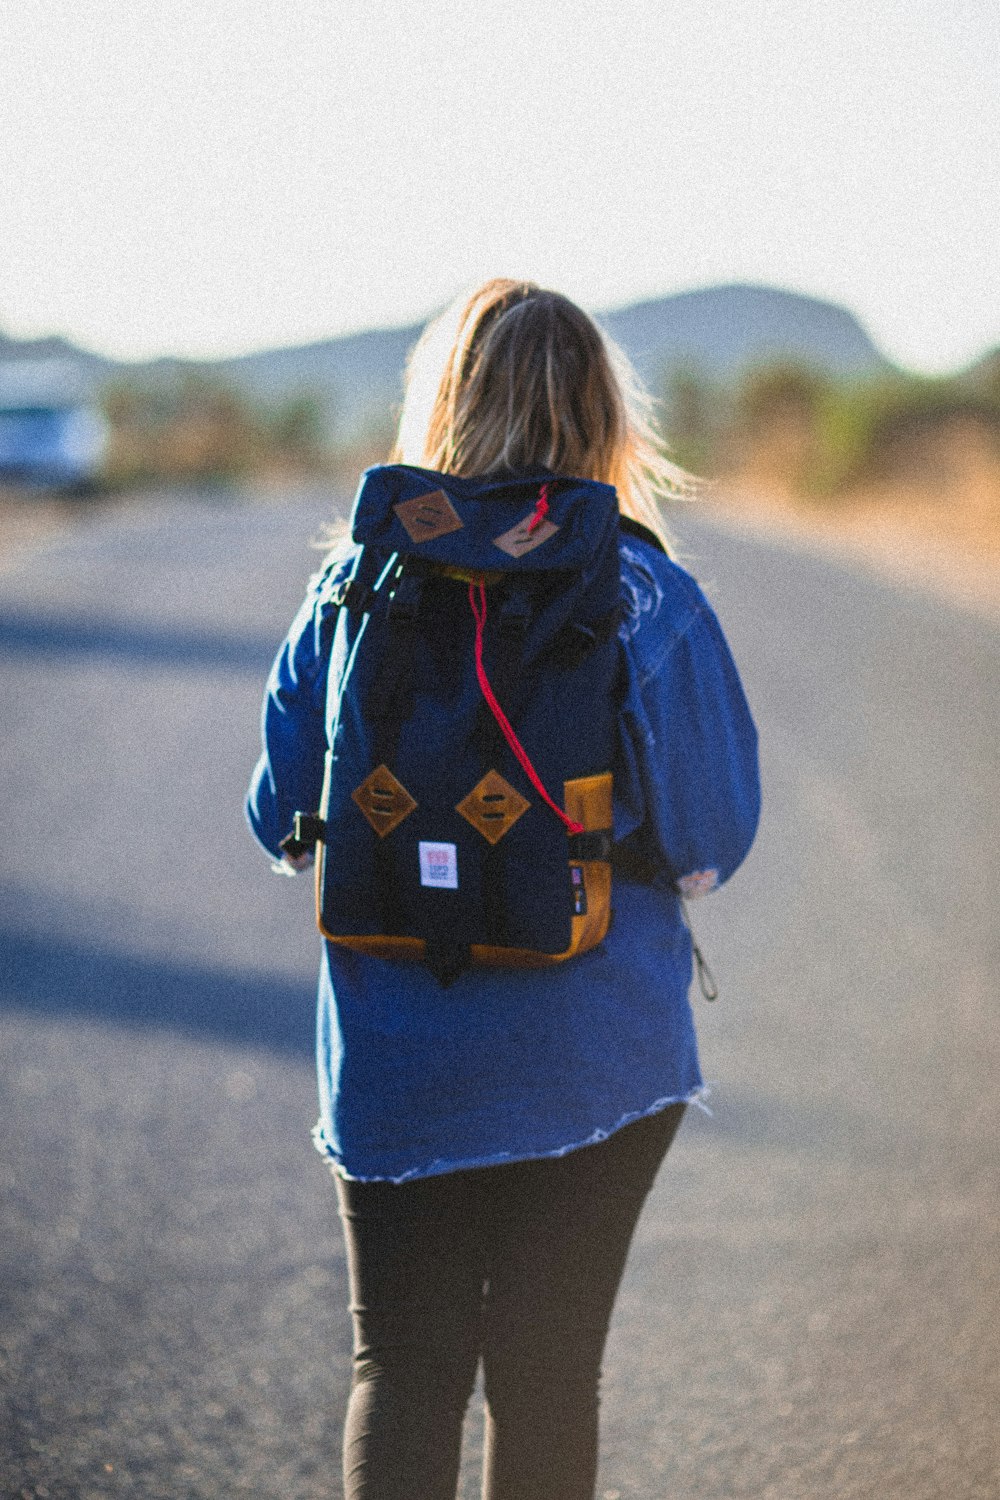 woman wearing blue backpack standing on road